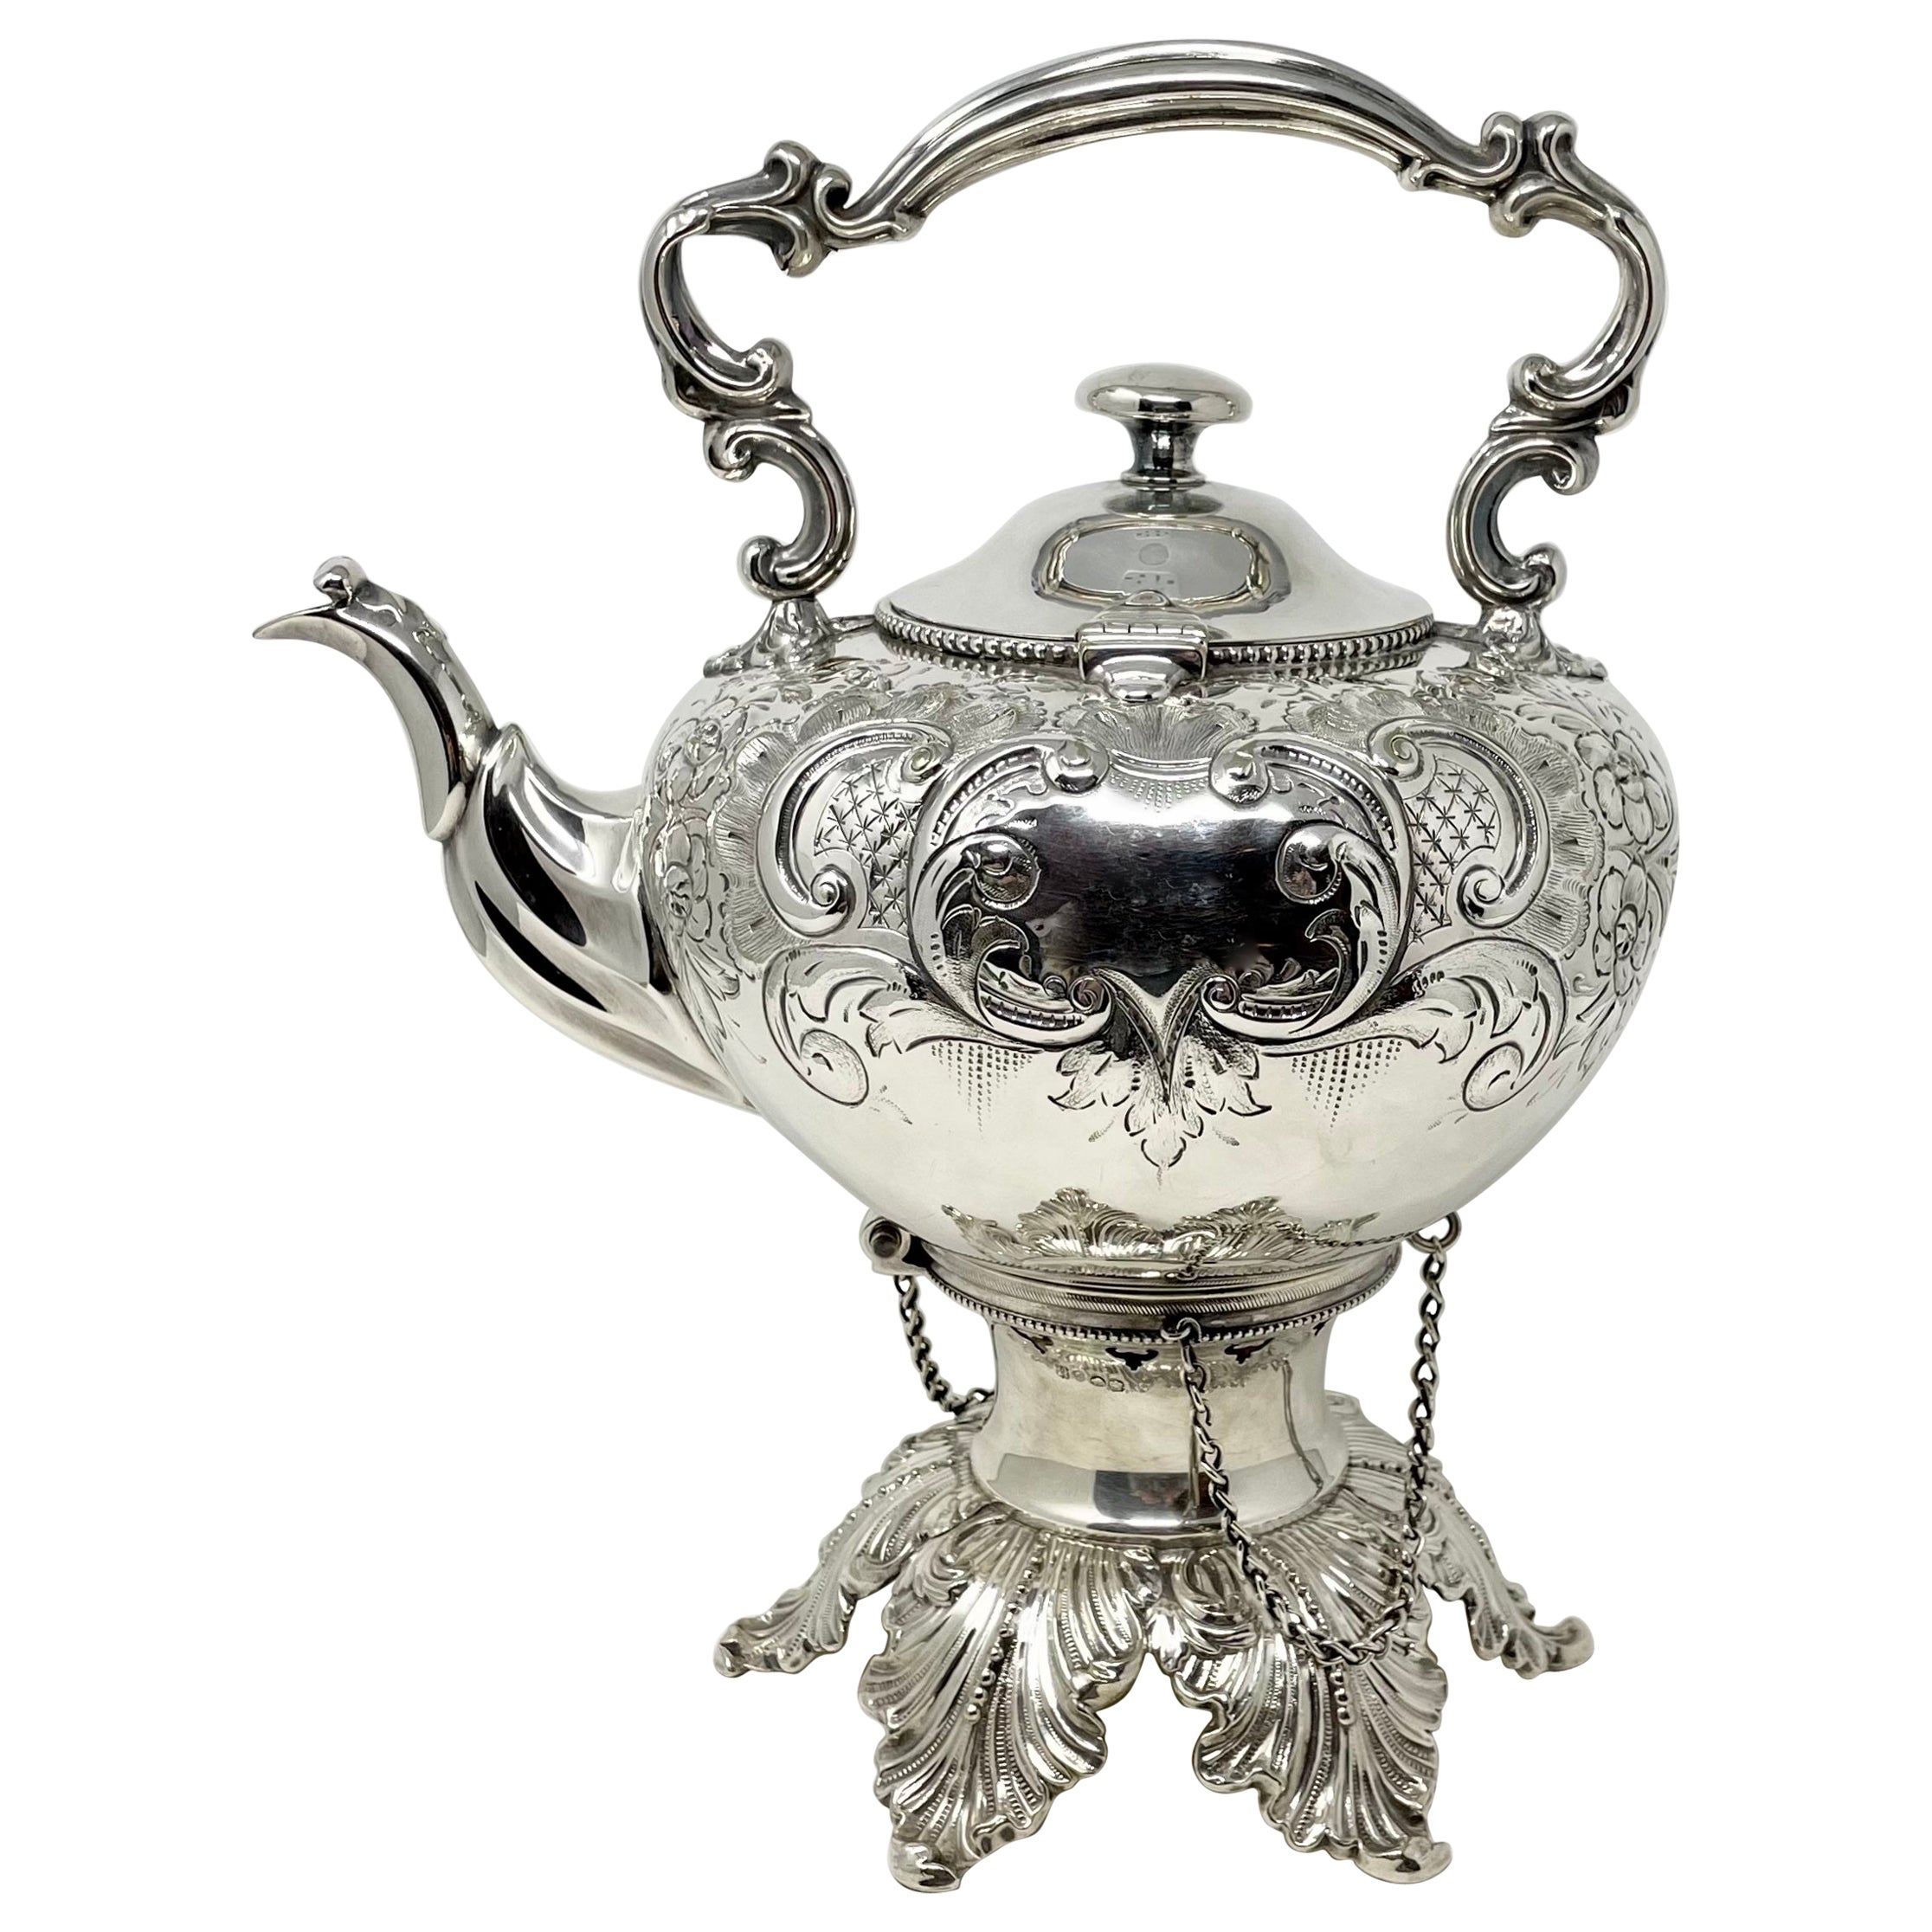 Antique English Sheffield Silver-Plate Footed Tea Pot with Etching, Circa 1860.